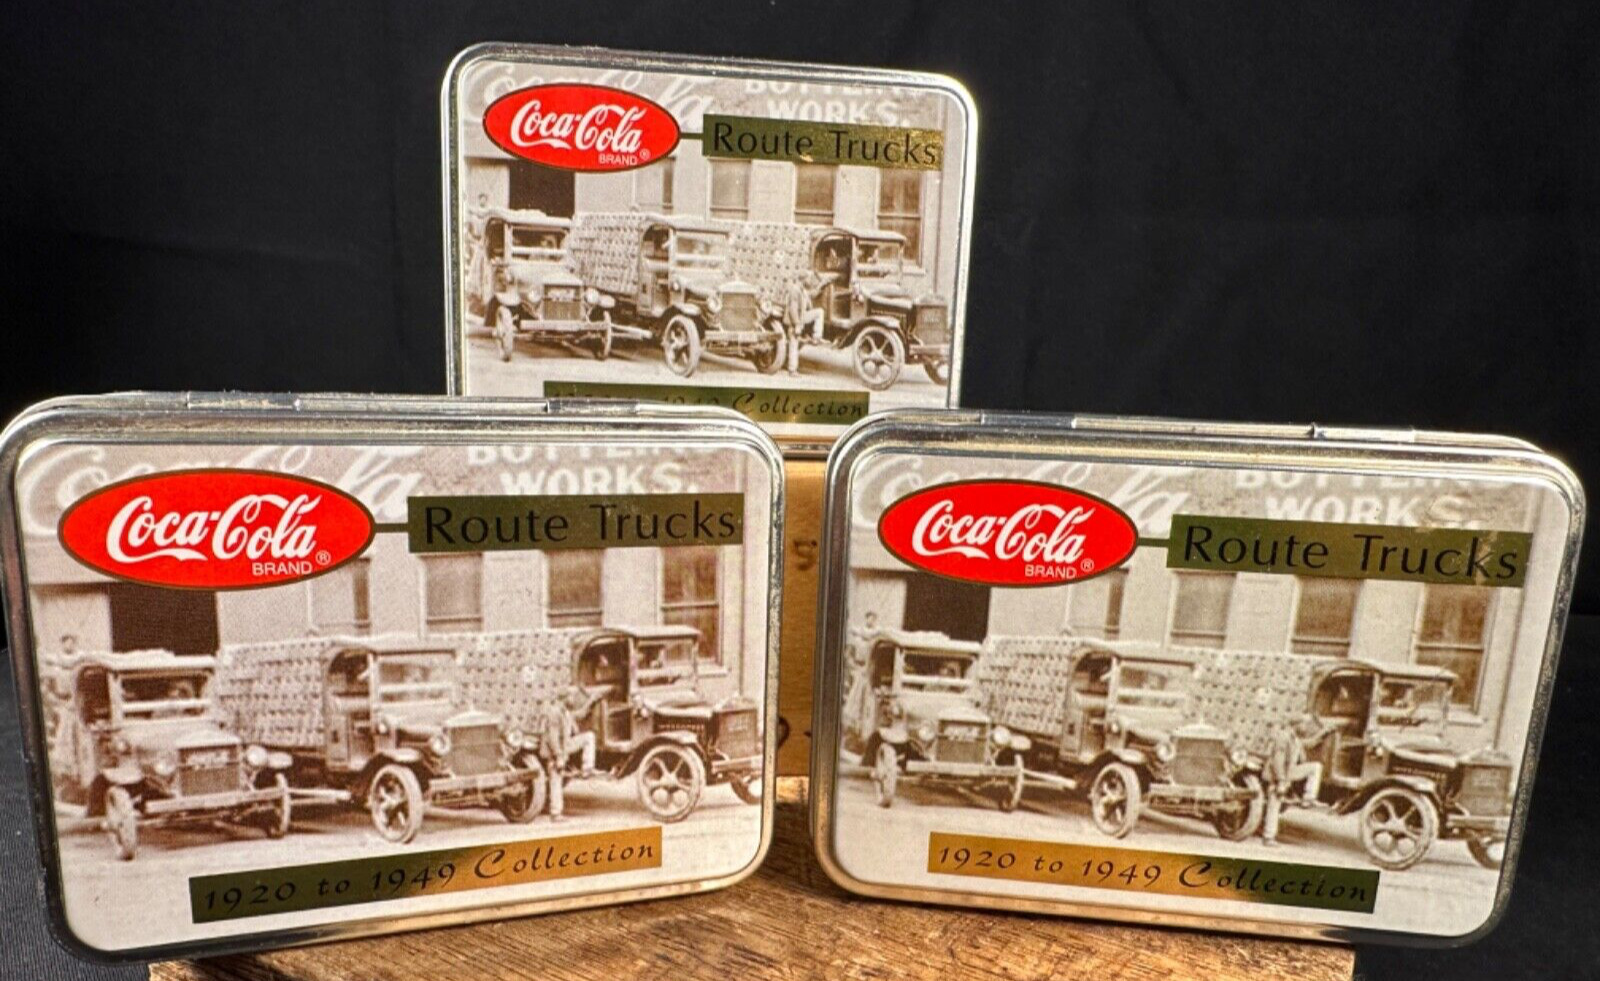 3 Vntge COCA COLA DELIVERY ROUTE TRUCK Pins w/Box 1920\'s to 1949 Collectibles